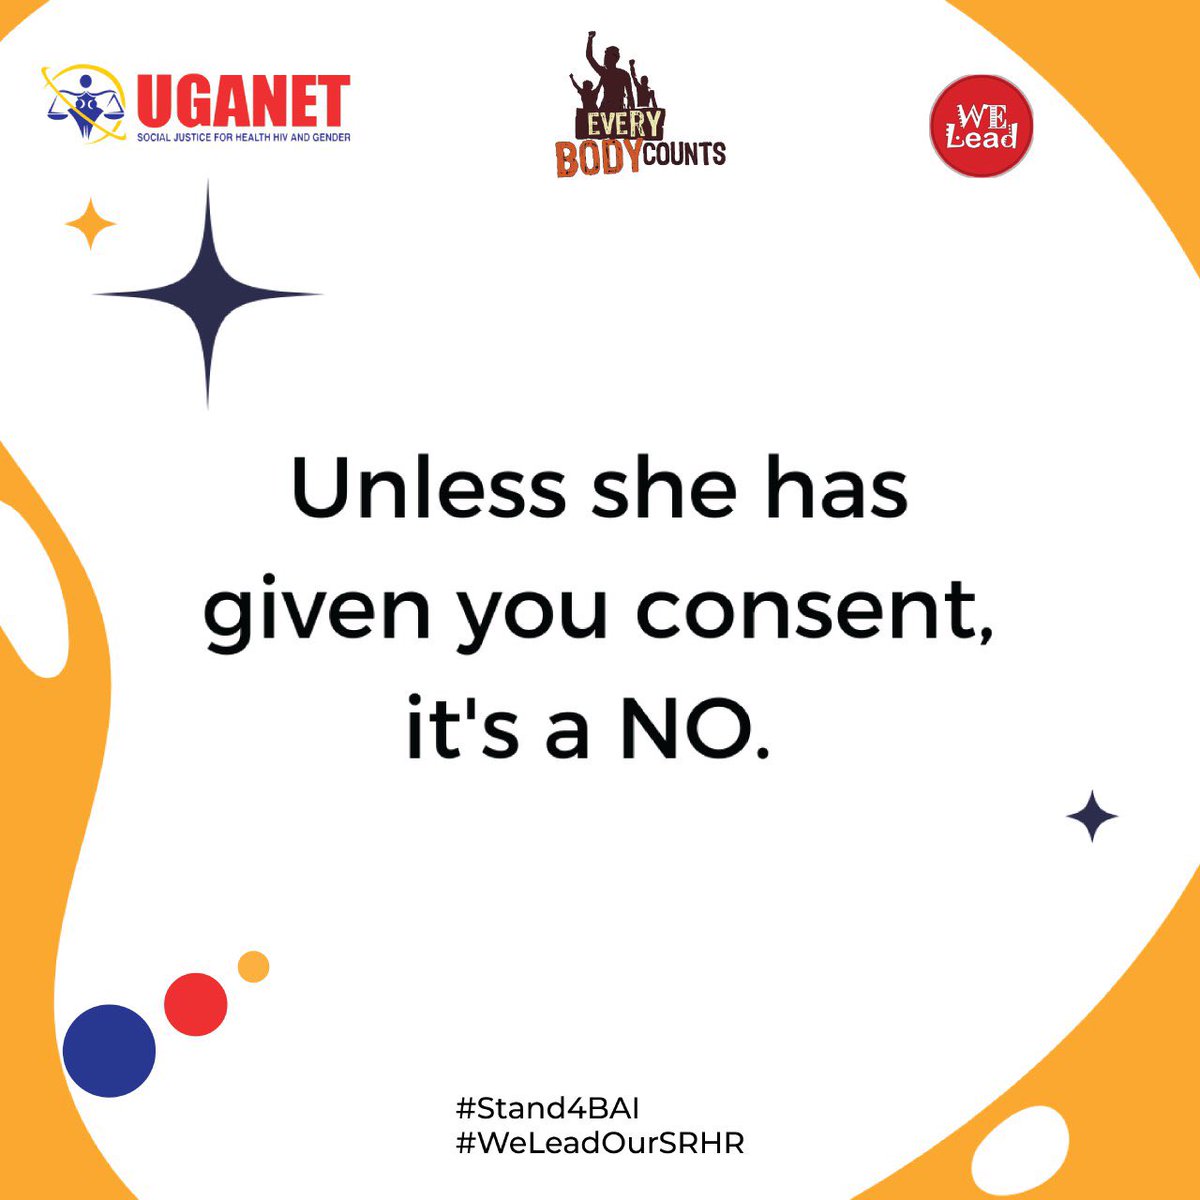 If it's a 'NO' it's a 'NO'
#WeLeadOurSRHR
#Stand4BAI